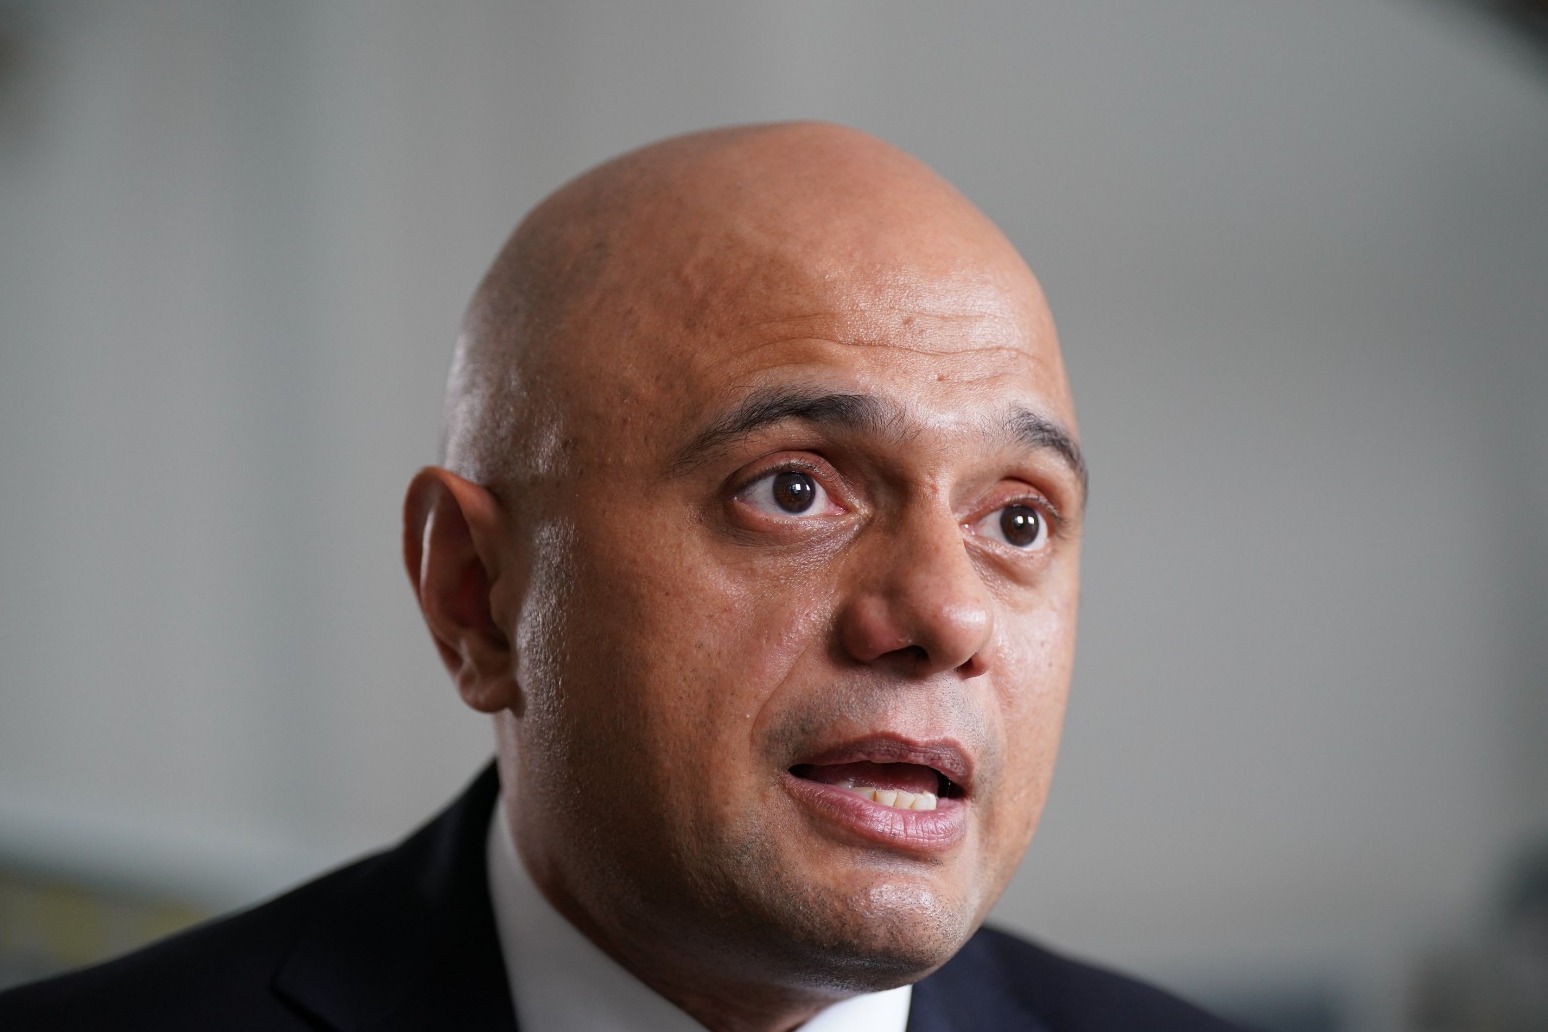 NHS app must become permanent fixture in people’s lives, says Javid 